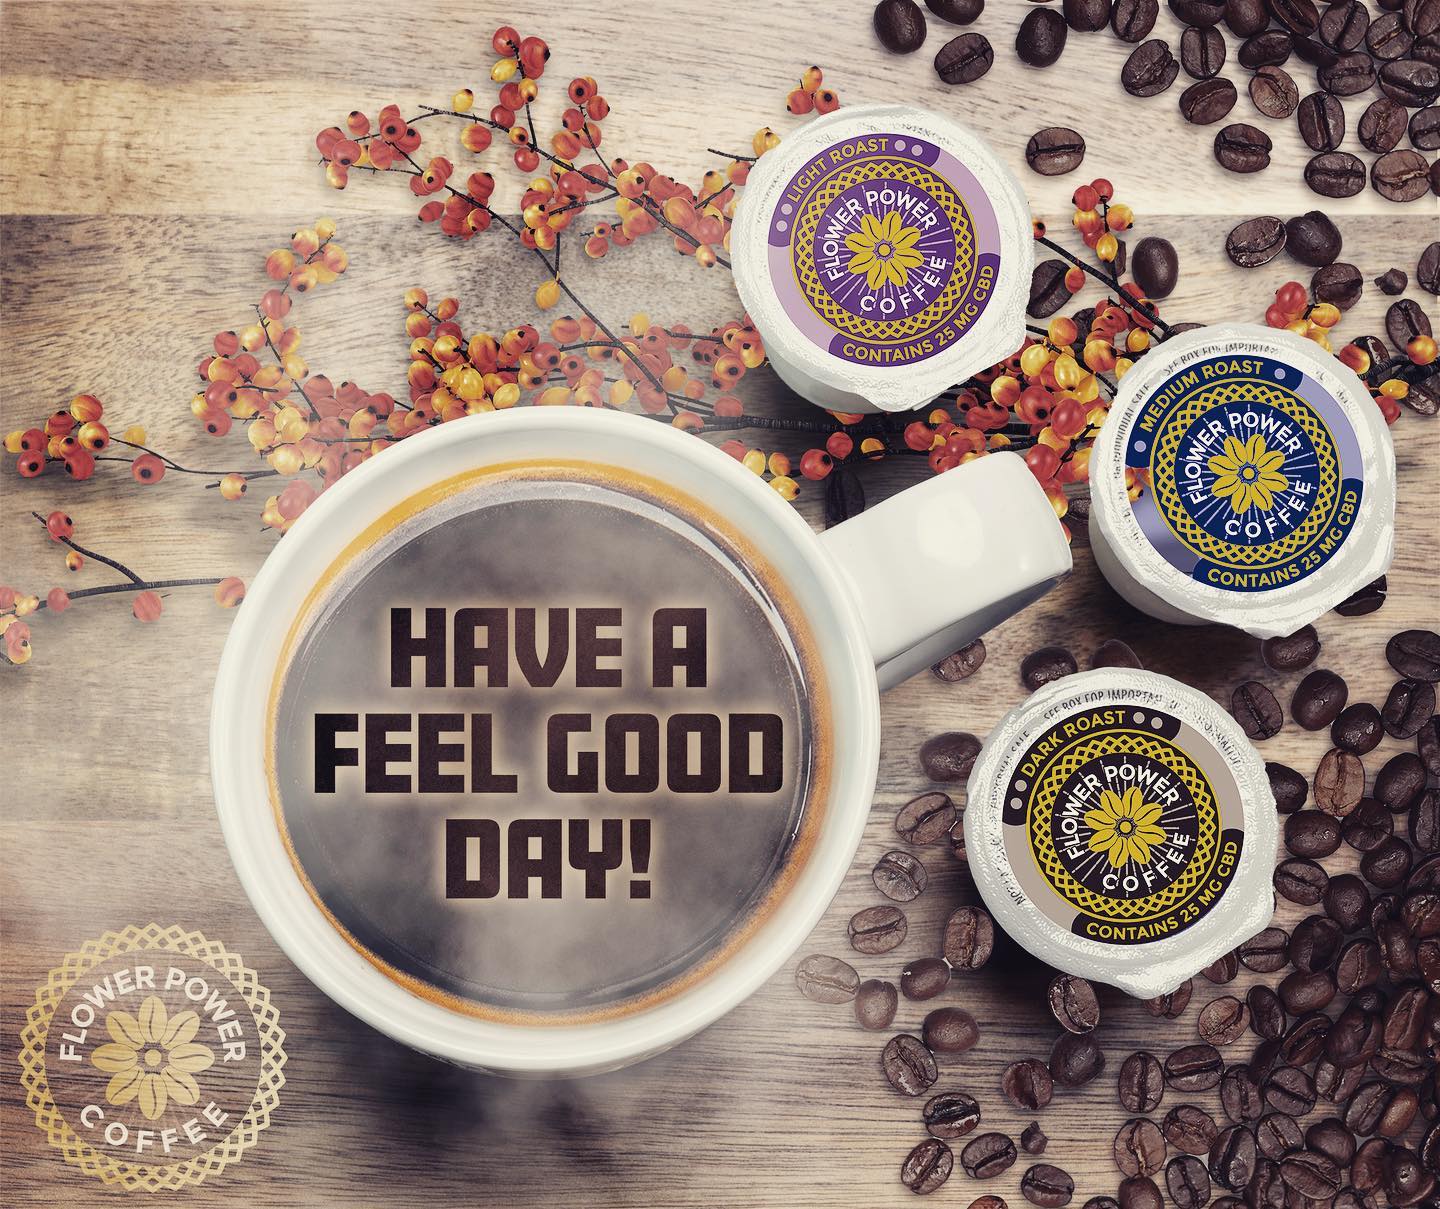 We loved branding our favorite morning drink @flowerpowercbdcoffee 

CBD coffee is here and Flower Power Coffee knows how to make it delicious and exact amount in each cup, nobody can say that without lying. They test theirs and the others all the time. 

Flowerpowercoffee.com